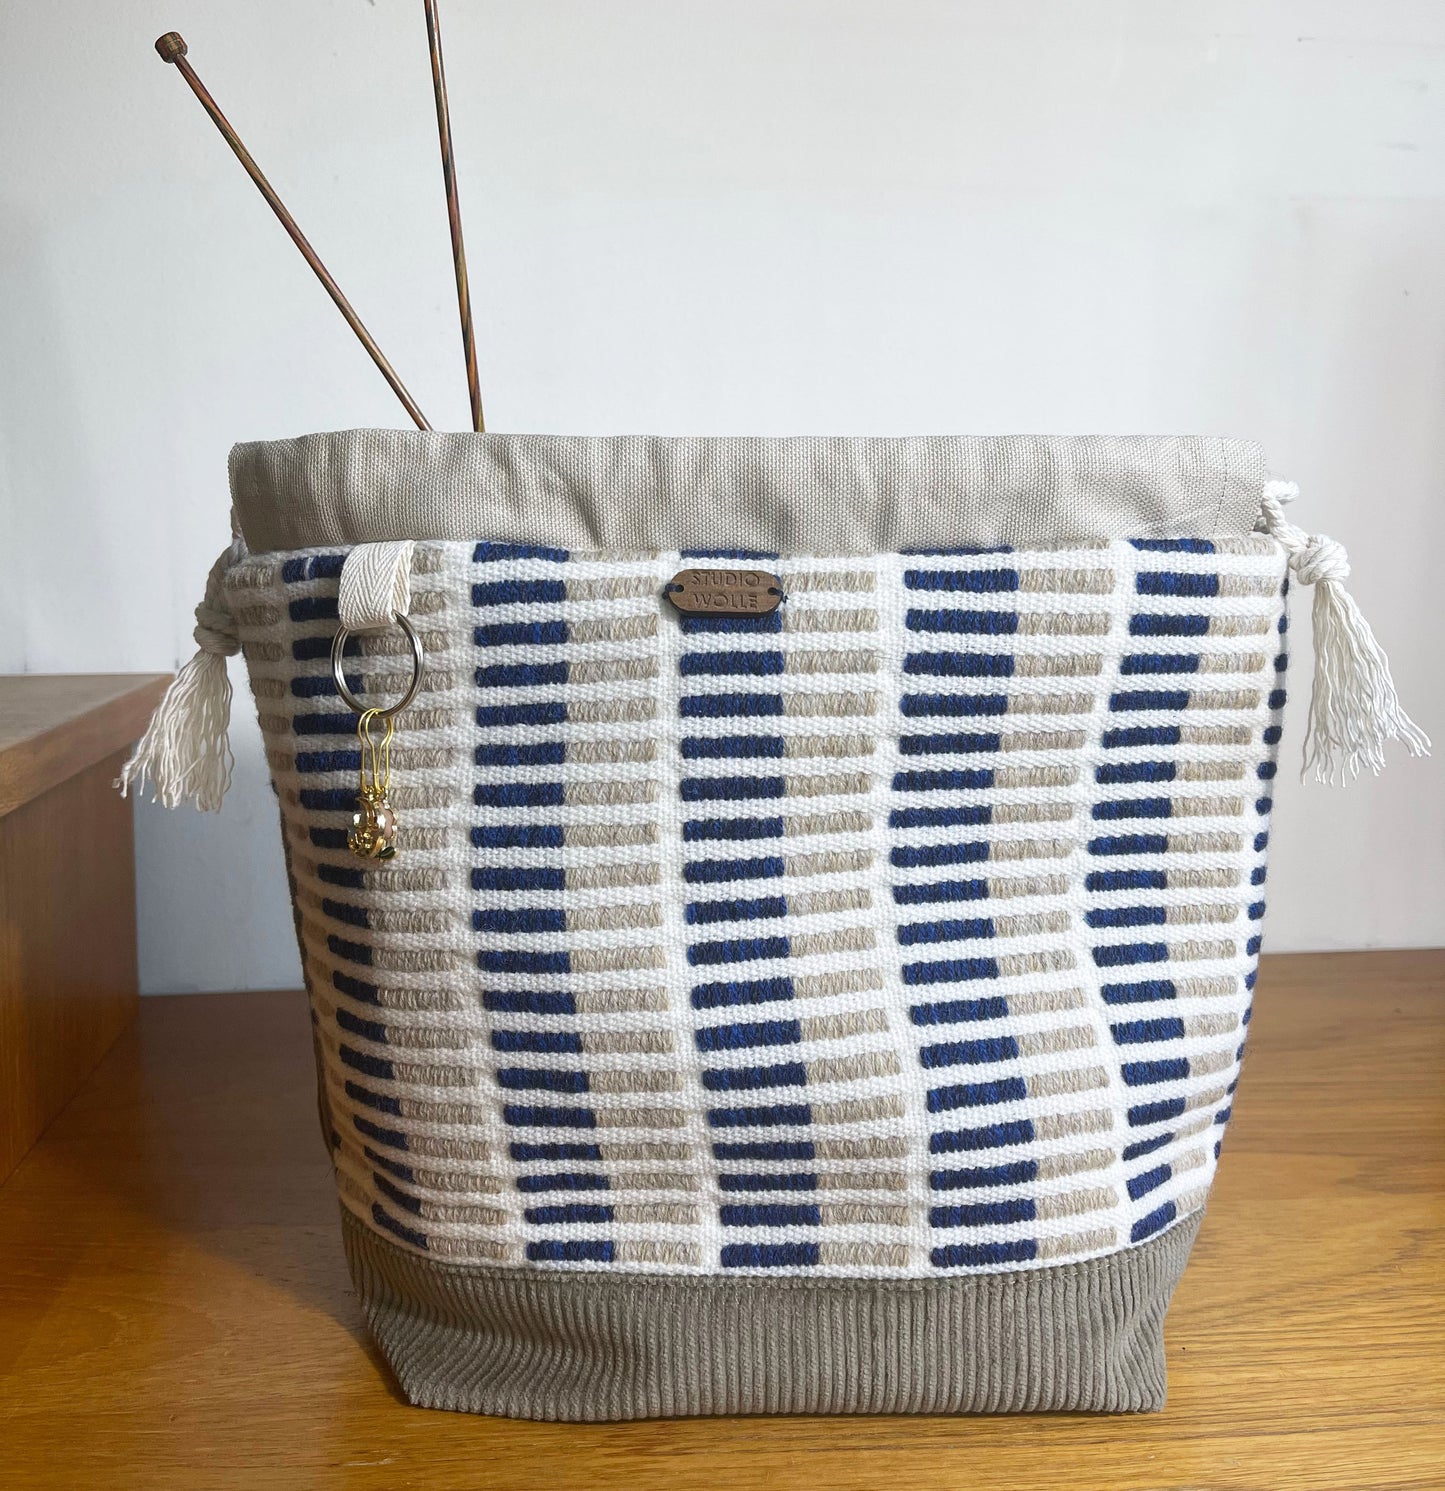 Large Project Bag - Woven